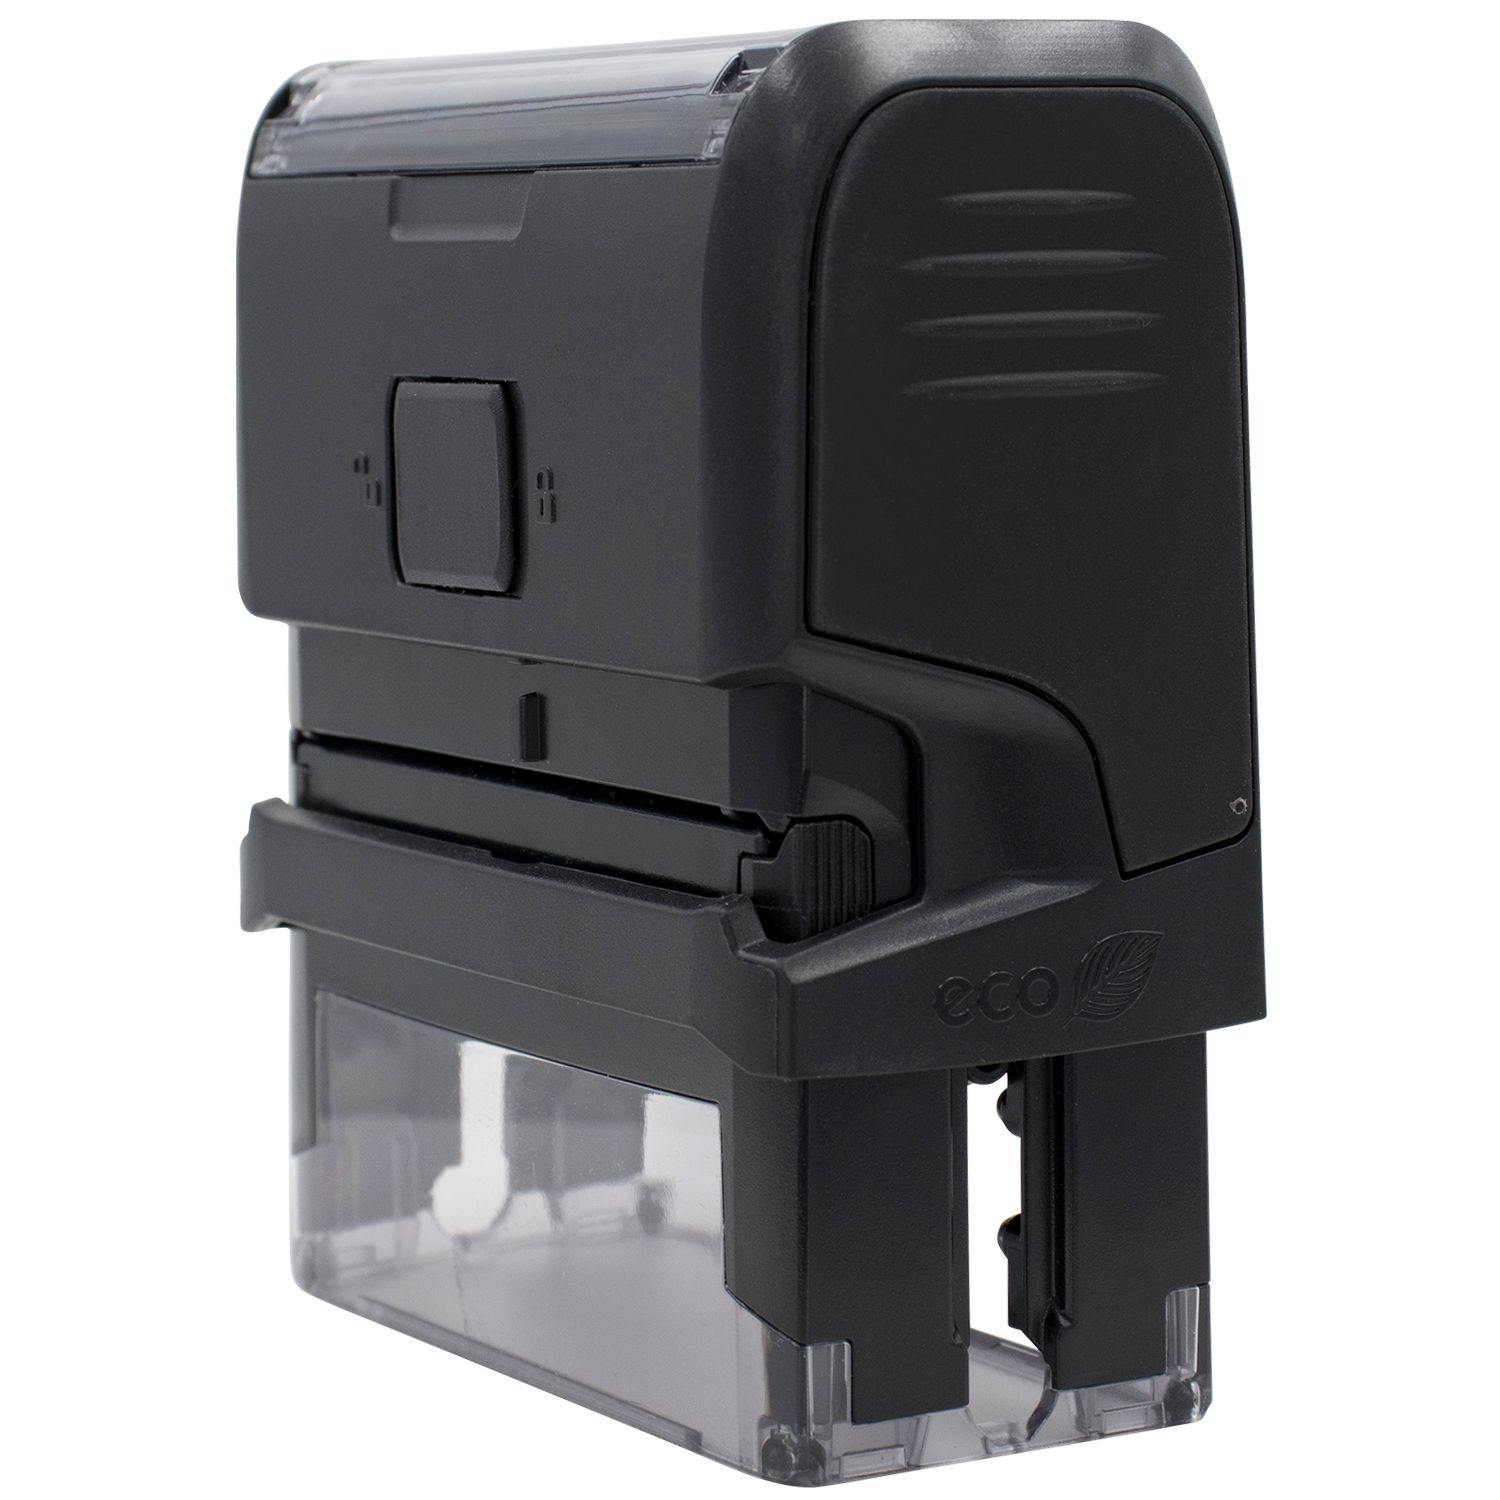 Side View of Large Self Inking Account Closed Stamp at an Angle